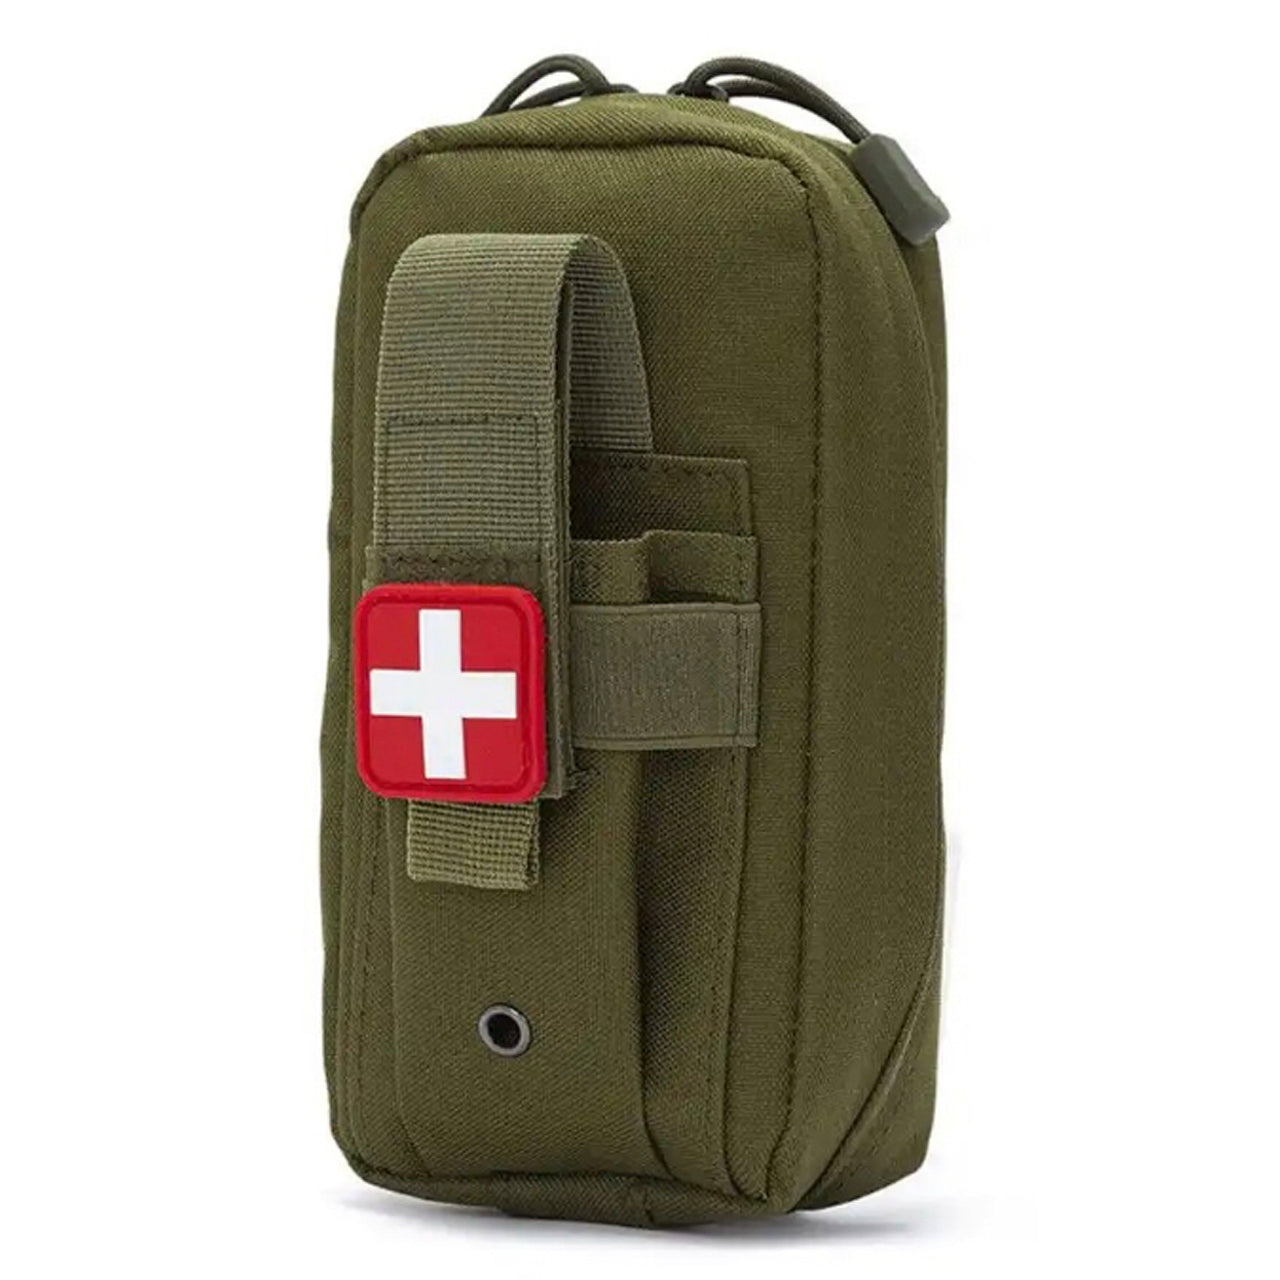 Compact Emergency kit pouch with lots of uses, carry your tourniquet, multitool or torch in the front pocket. Add your essential items in the main compartment from bandages to rations. Attach to your gear with x2 MOLLE straps to suit your needs but don't forget this essential pouch in the field. www.moralepatches.com.au